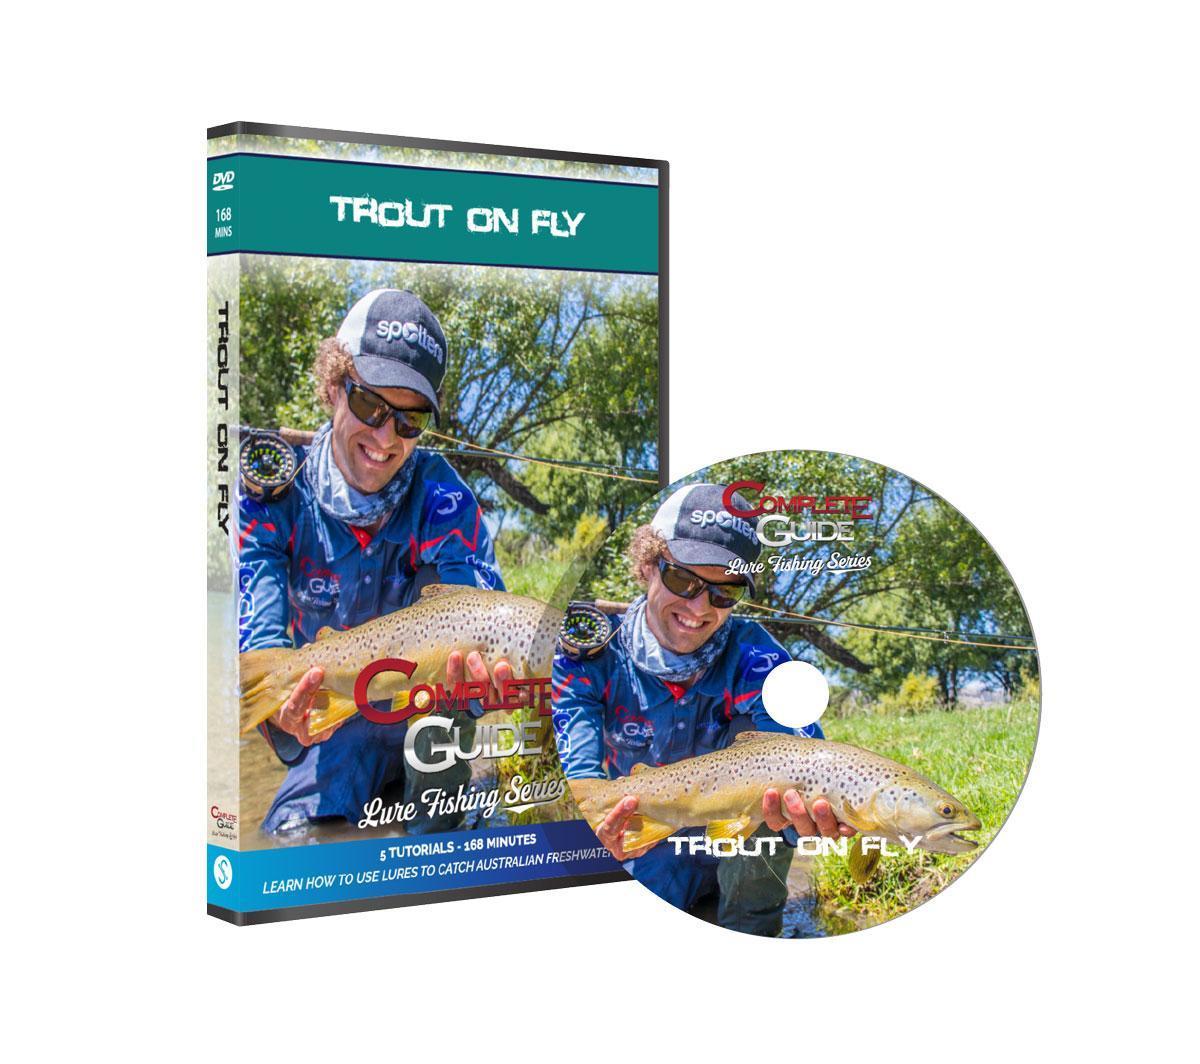 Trout on Fly - Complete Guide DVD Series-0